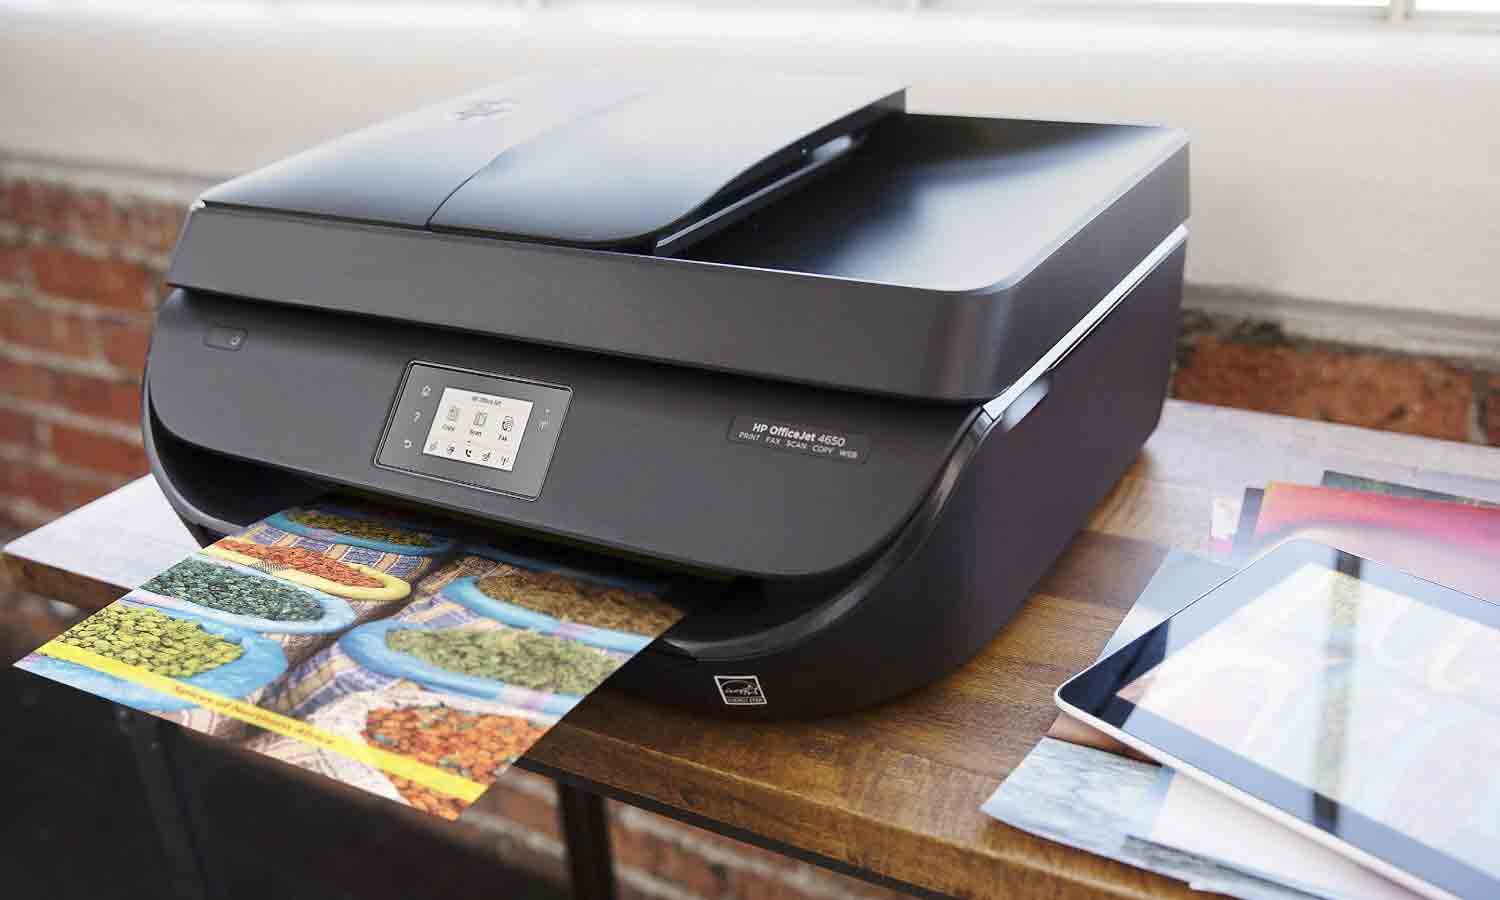 HP Envy 7640 Printer is Offline- Trouble Shooting Instruction